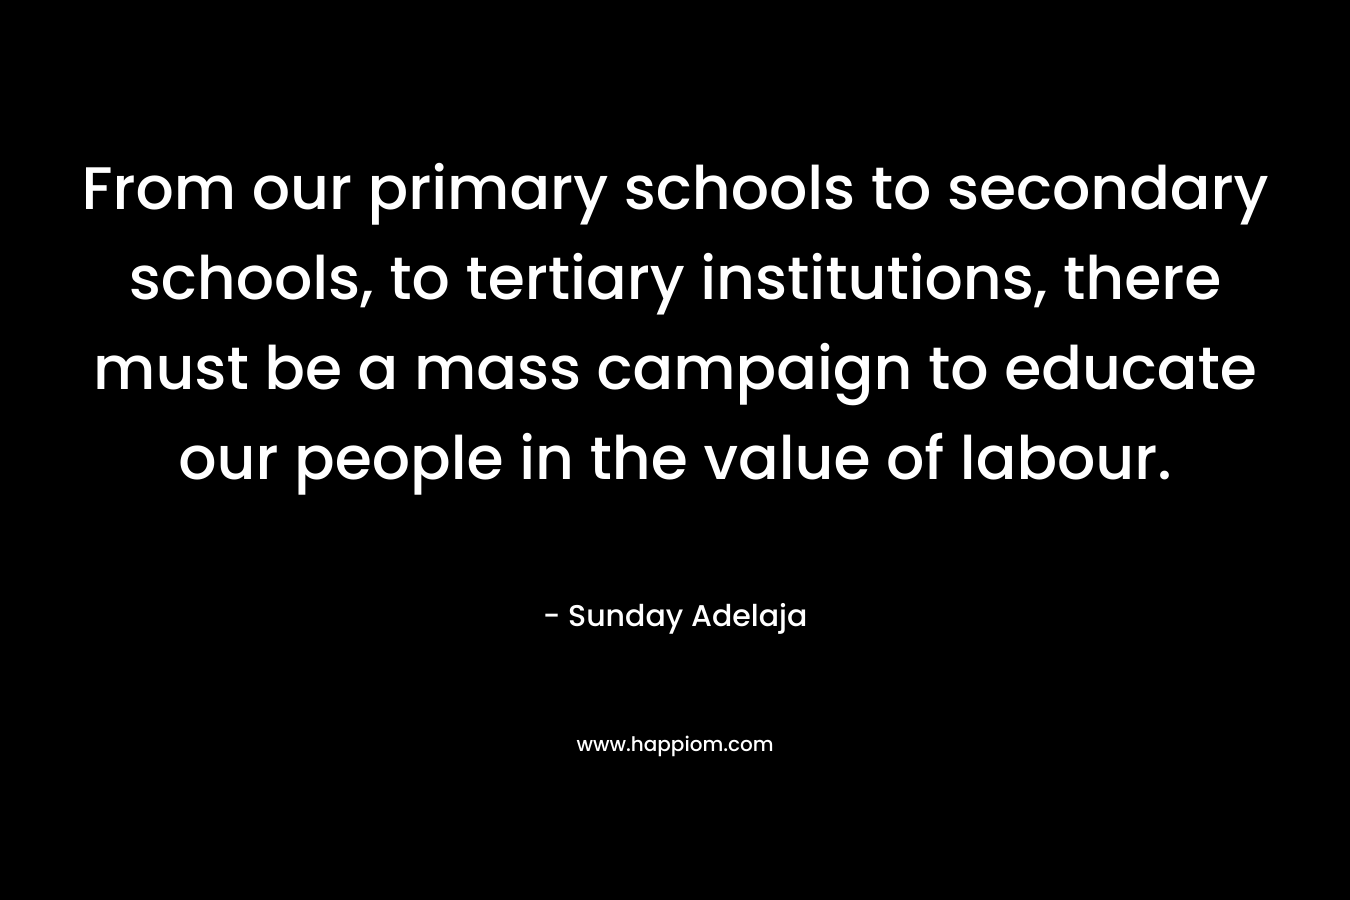 From our primary schools to secondary schools, to tertiary institutions, there must be a mass campaign to educate our people in the value of labour.